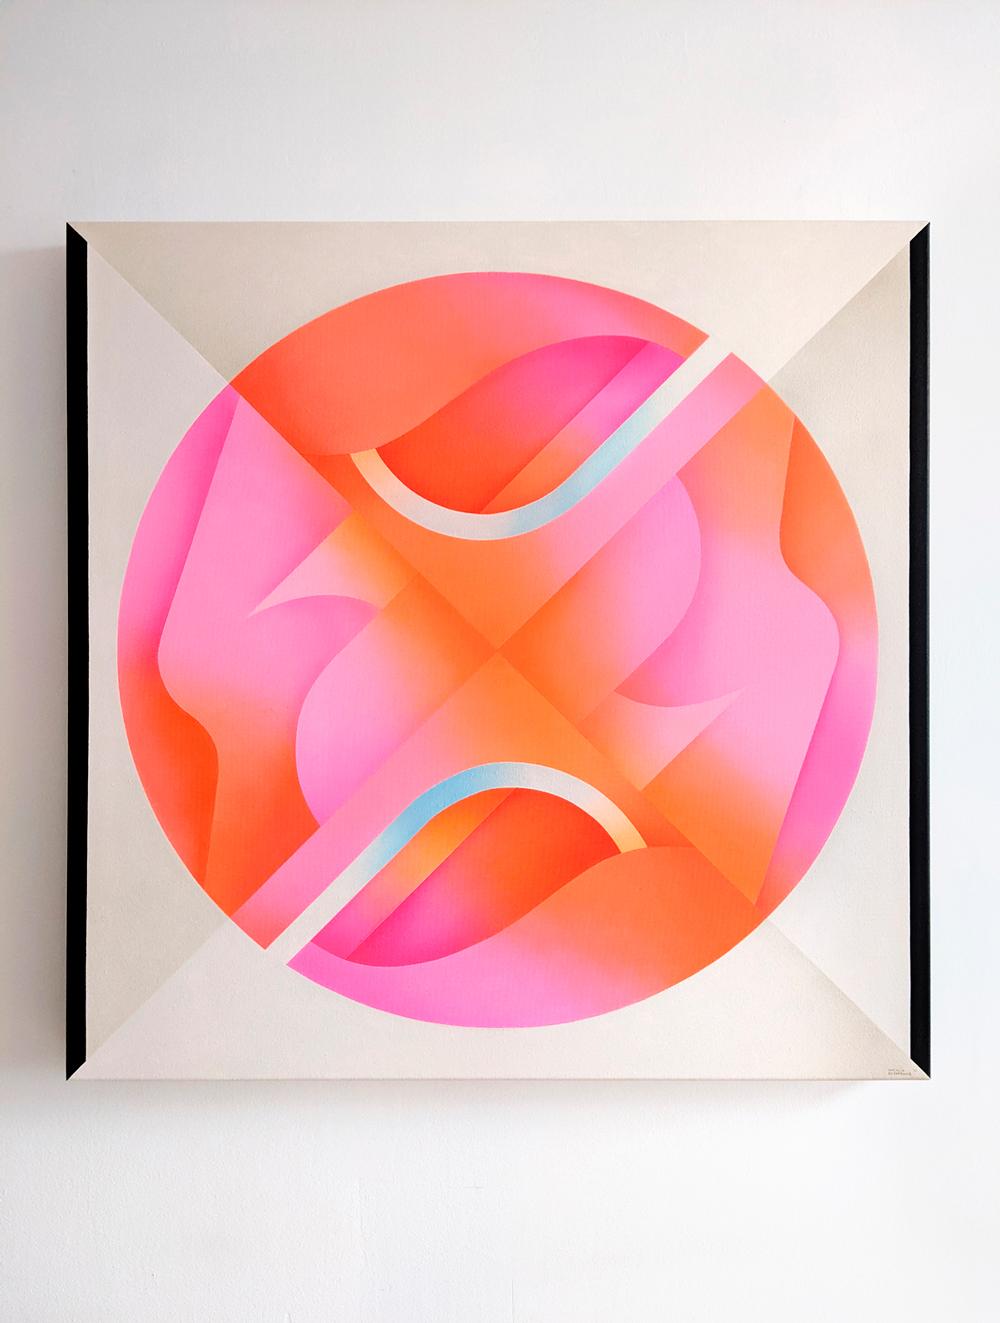 The edges are painted to prolong the painting. No framing needed. It's signed on the front. Certificate of Authenticity provided. Shipped flat (or rolled in a tube if requested). 
-
Ostapenko has developed a highly refined and graphic, abstract